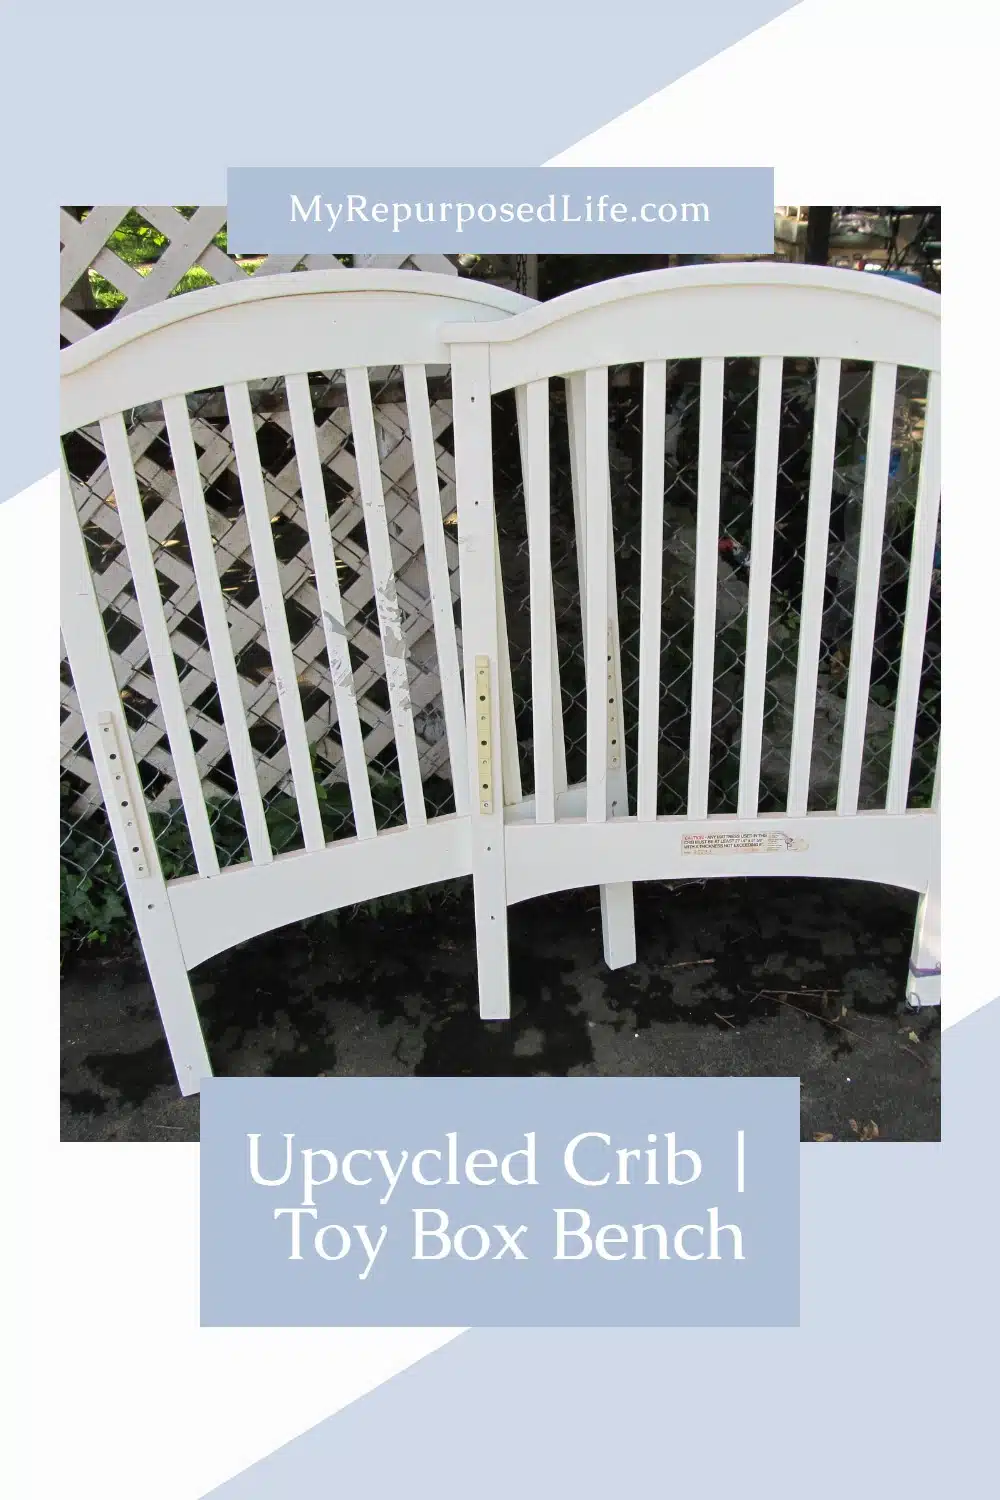 How to do an upcycle crib project that will reuse the crib your toddler has outgrown to make a new and useful toy box. via @repurposedlife